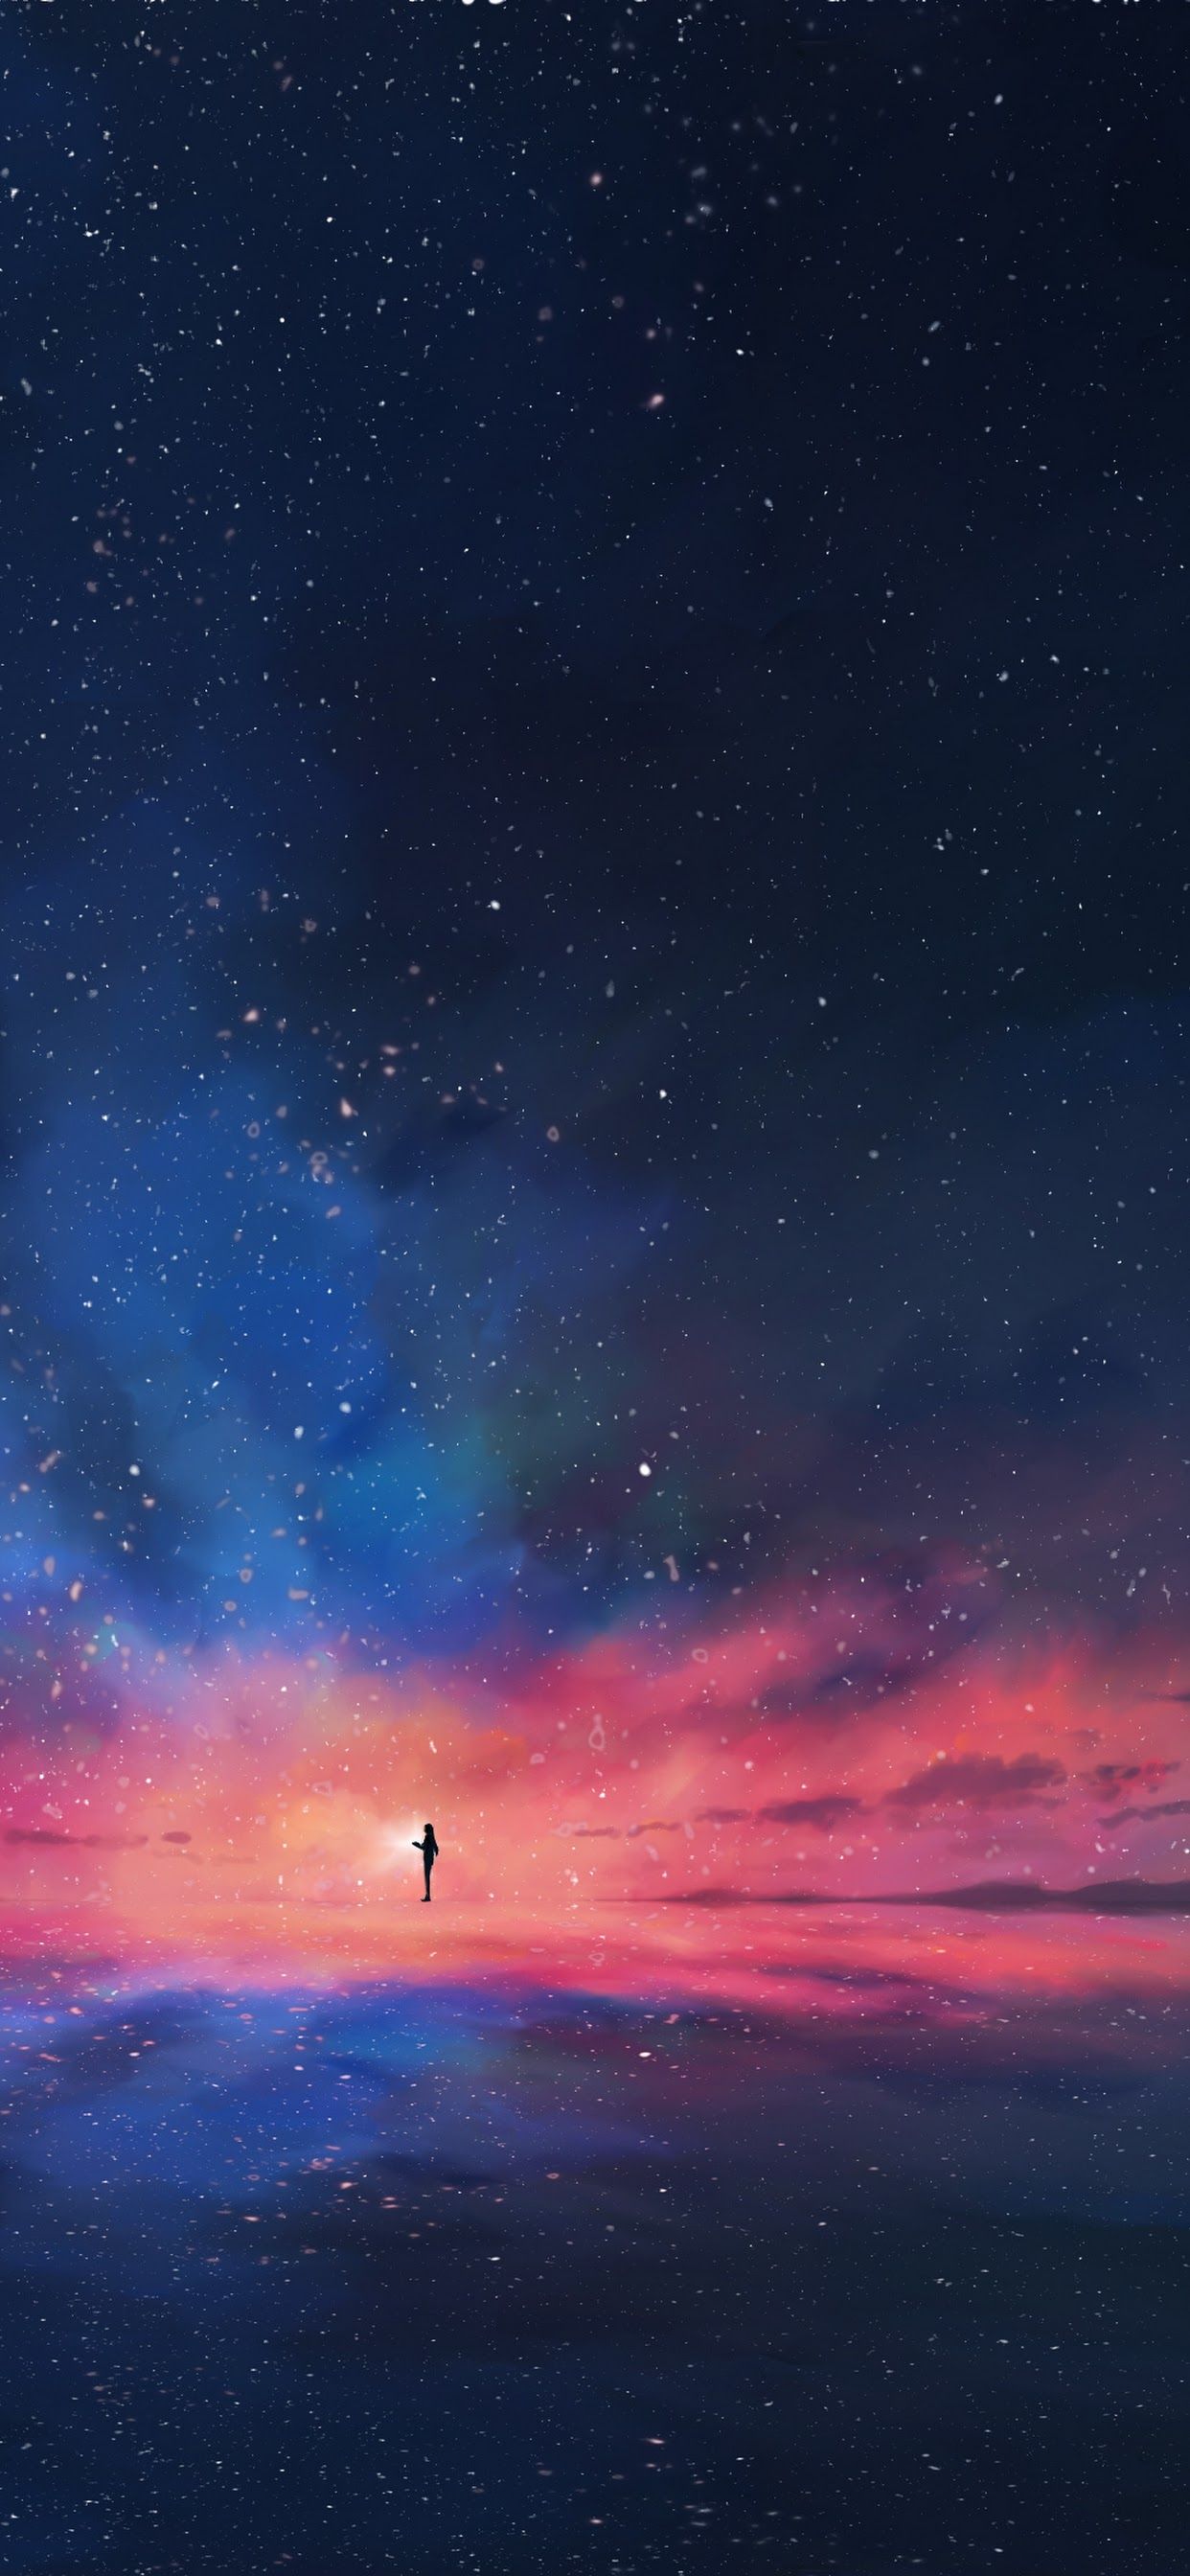 Starry Sky Night Lake iPhone Wallpapers Free Download